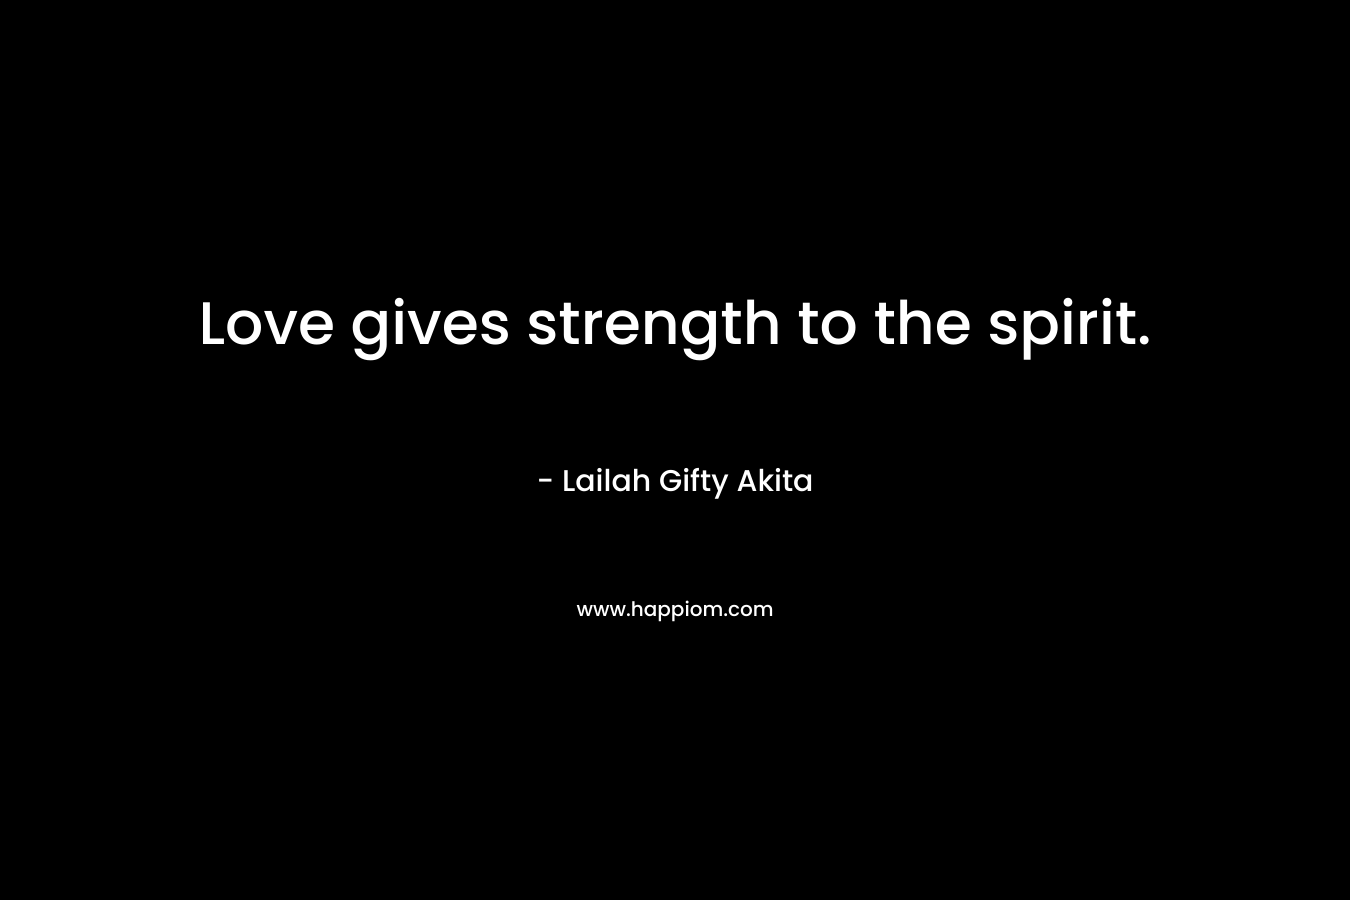 Love gives strength to the spirit.